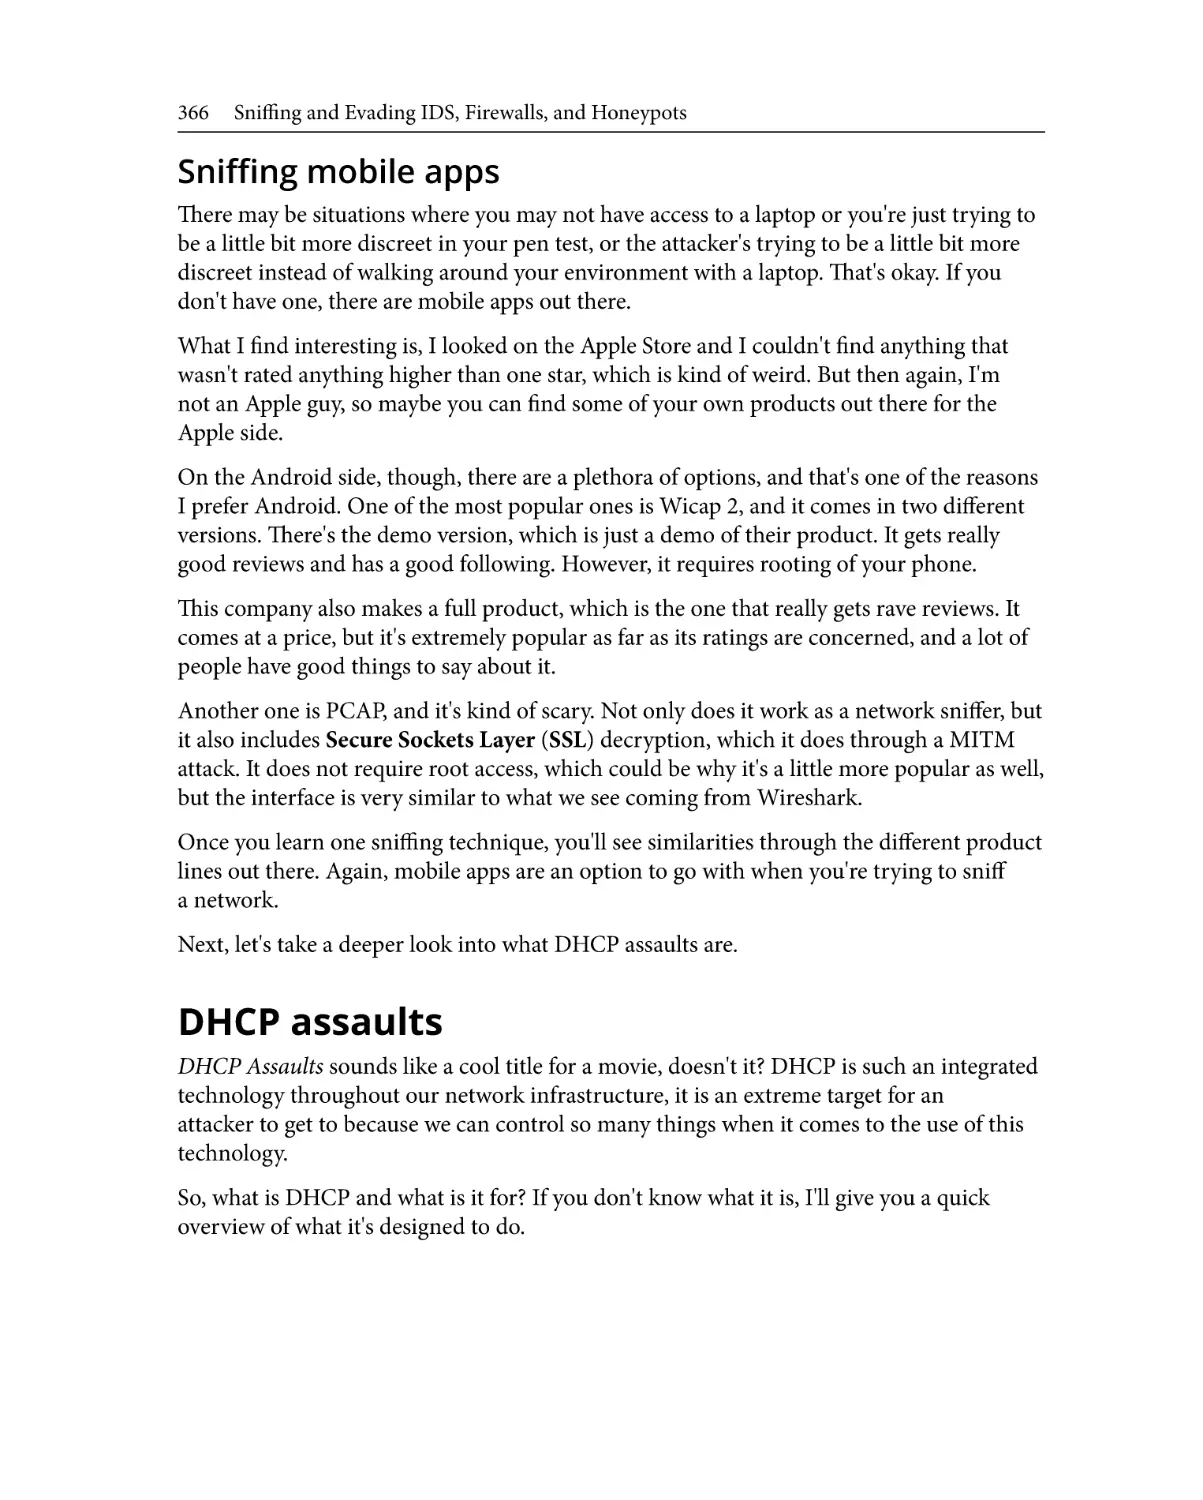 Sniffing mobile apps
DHCP assaults